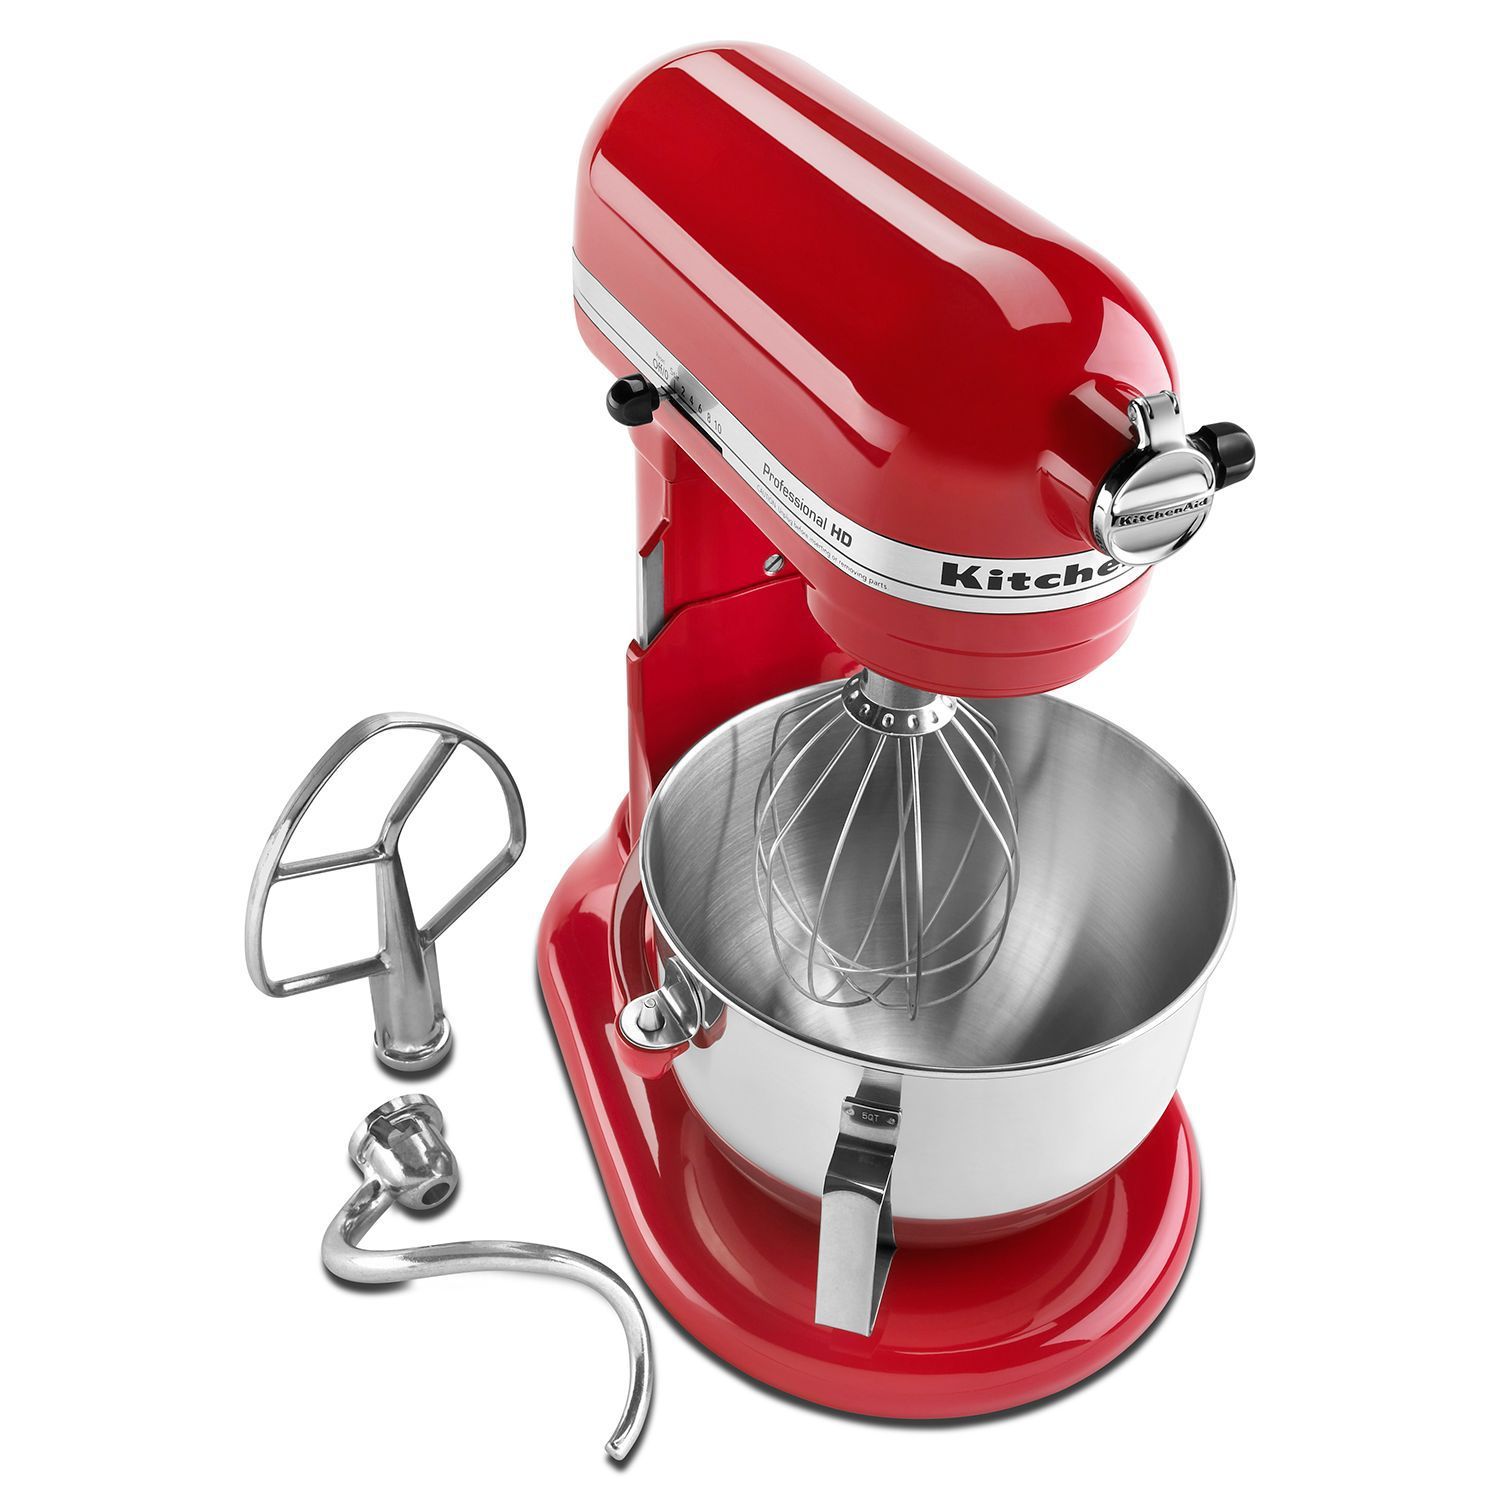 KitchenAid Professional Heavy-Duty Stand Mixer in Red